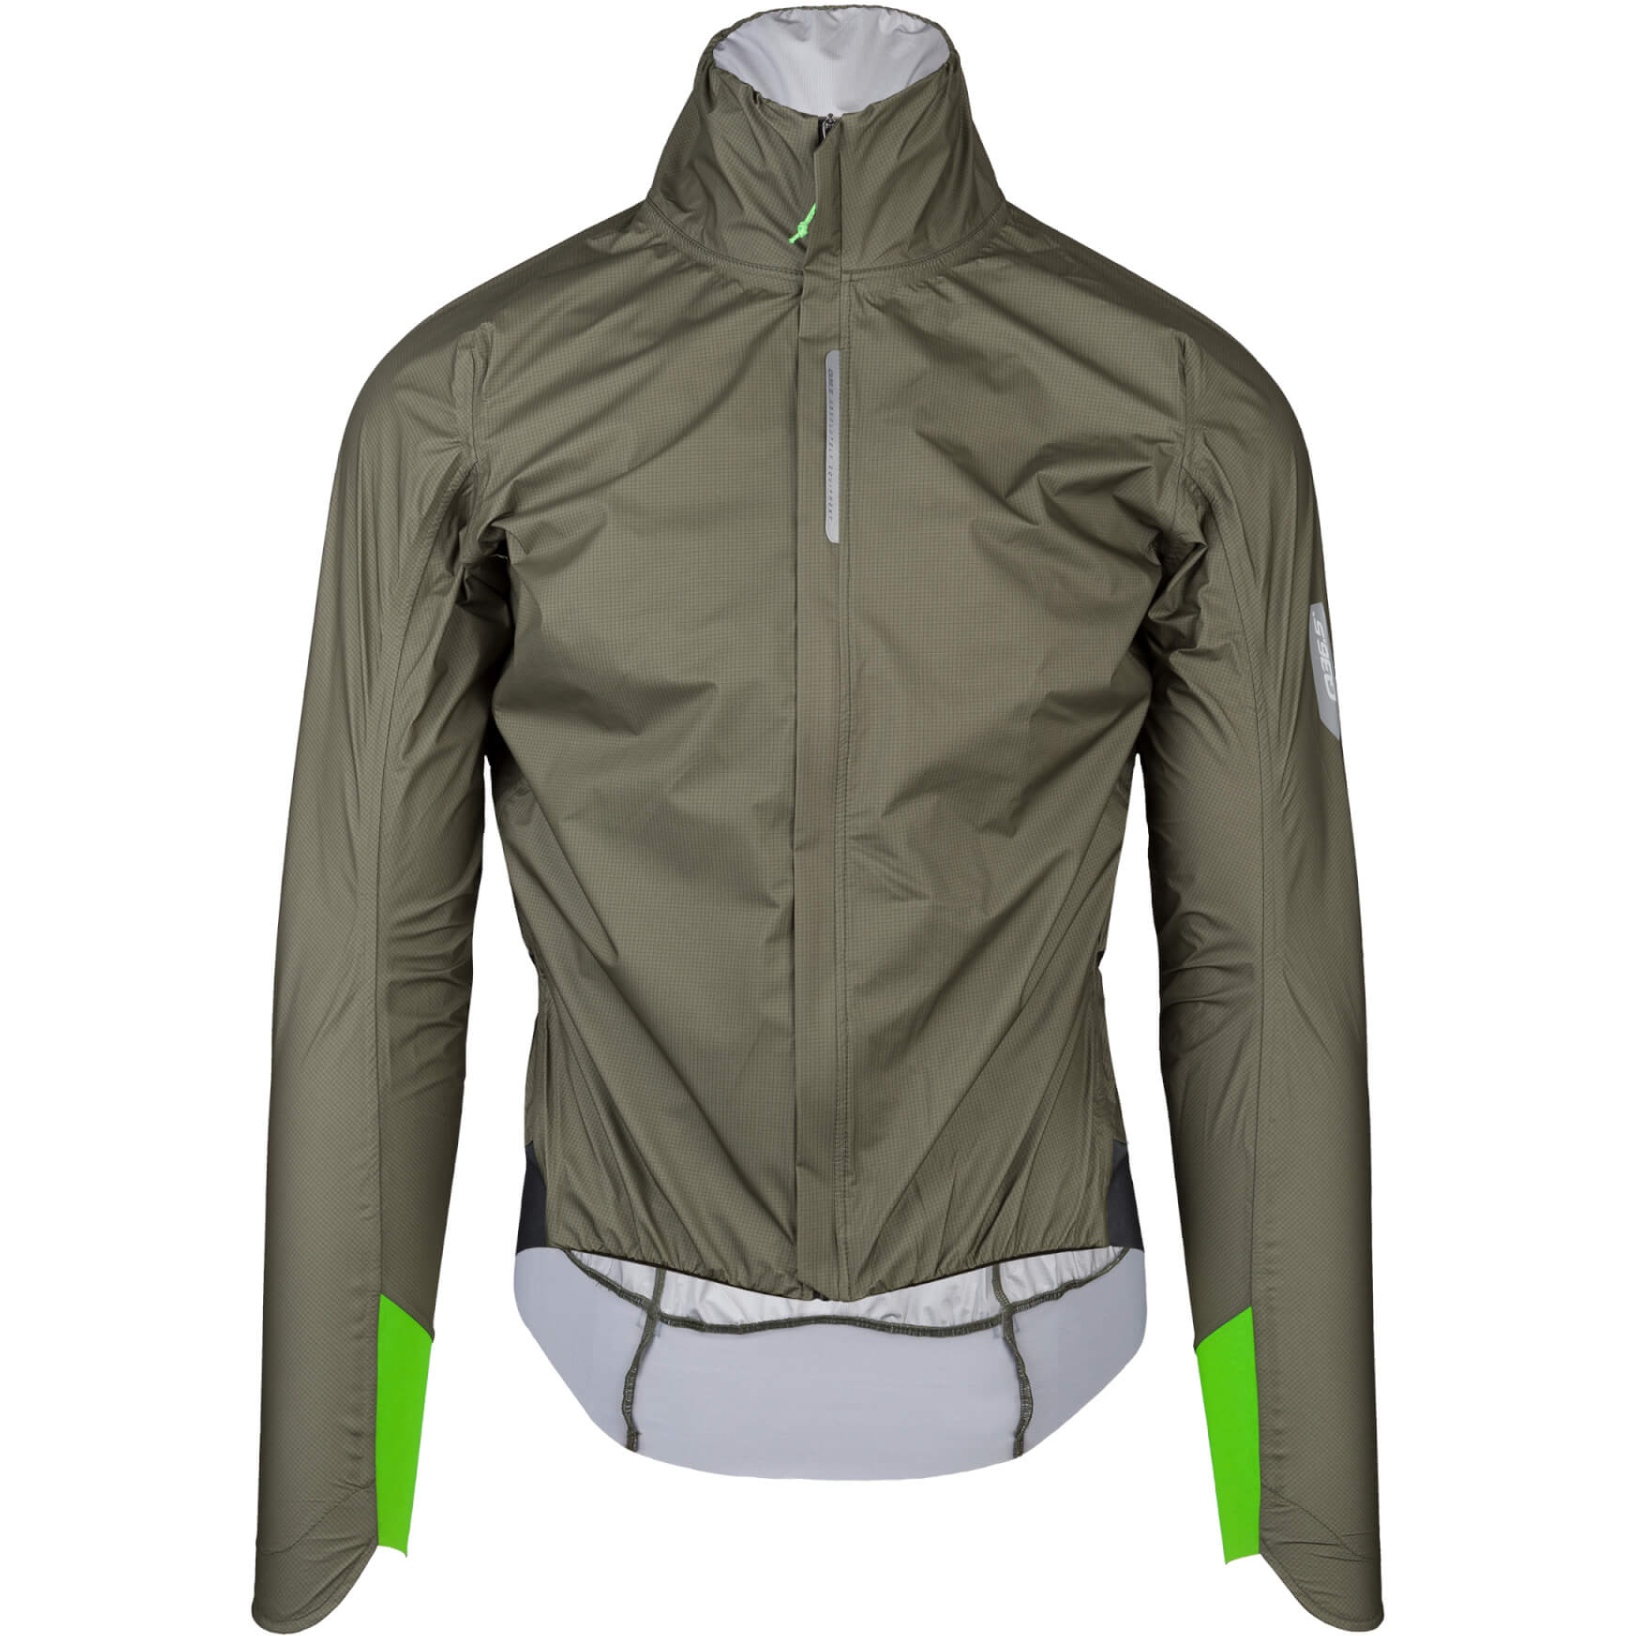 Image of Q36.5 R. Shell Protection X Cycling Rain Jacket - olive green